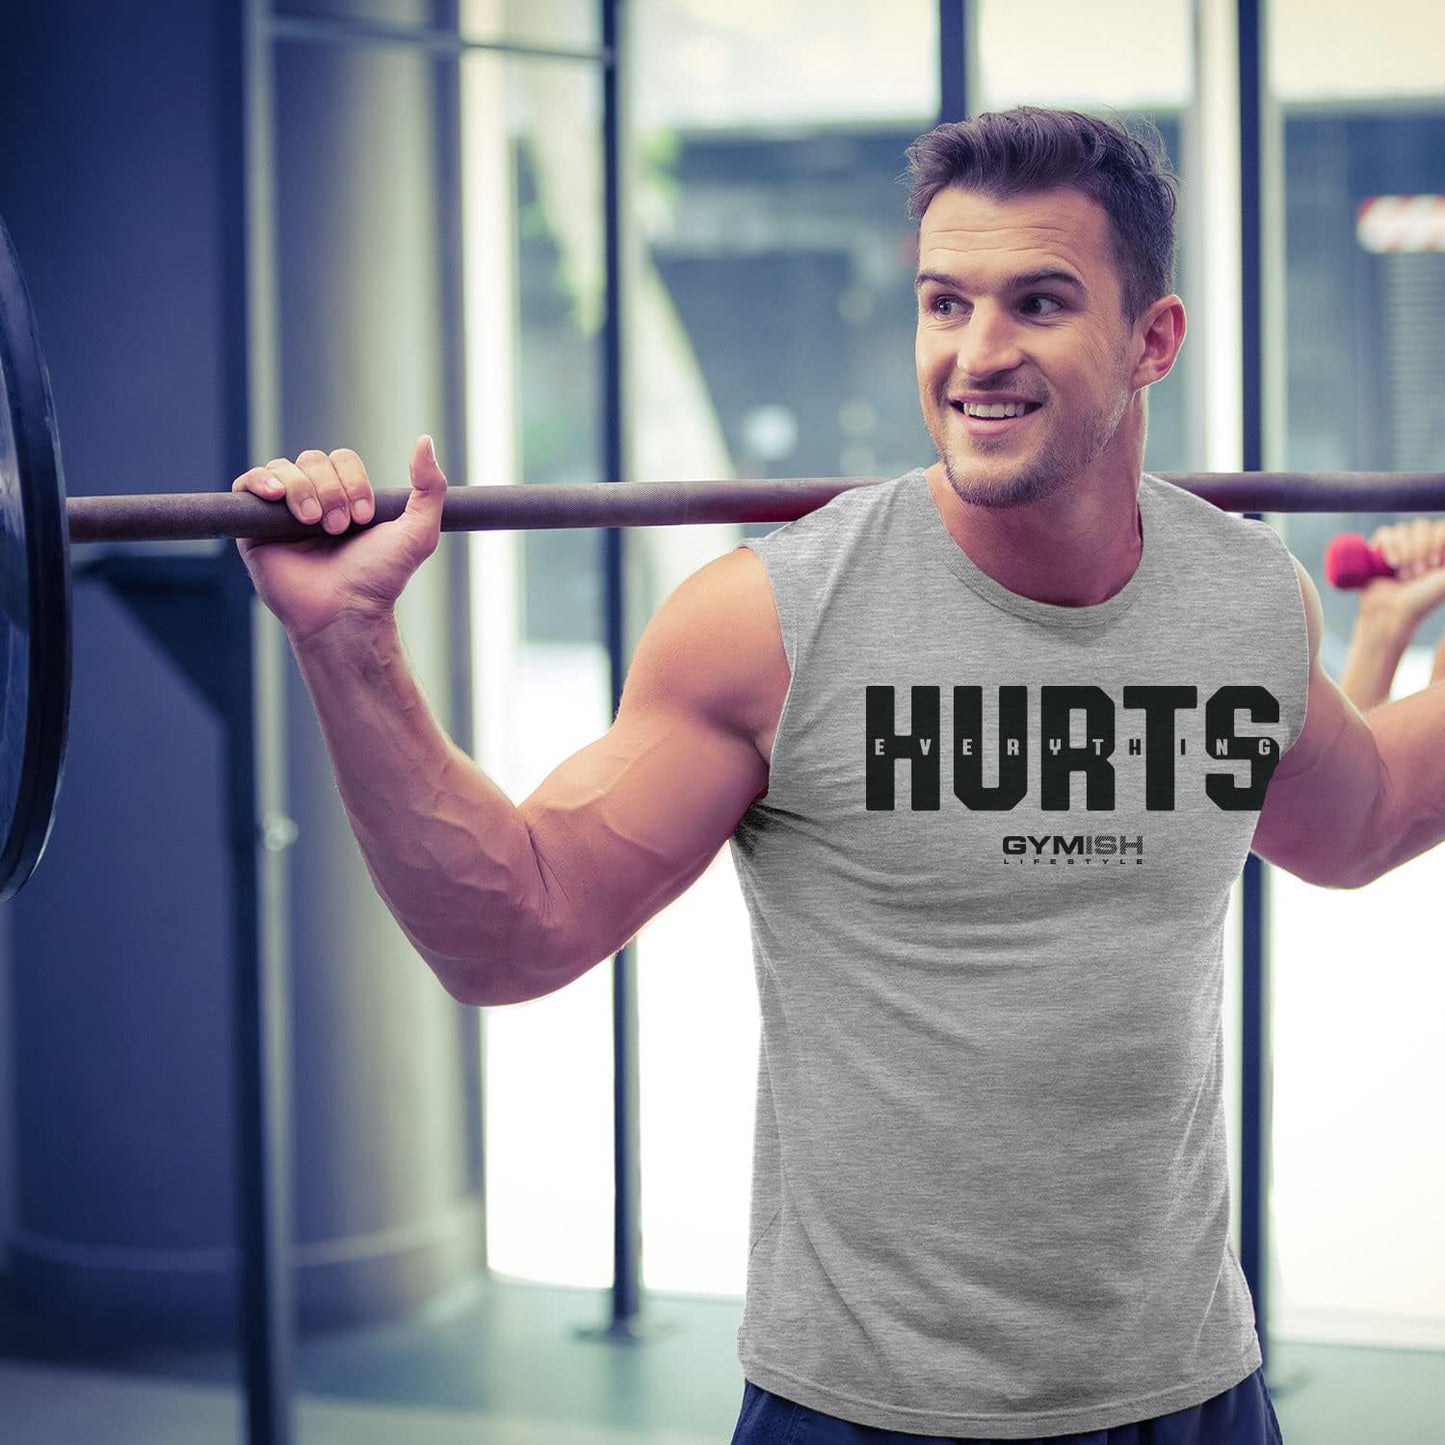 Everything Hurts Muscle Tank Top